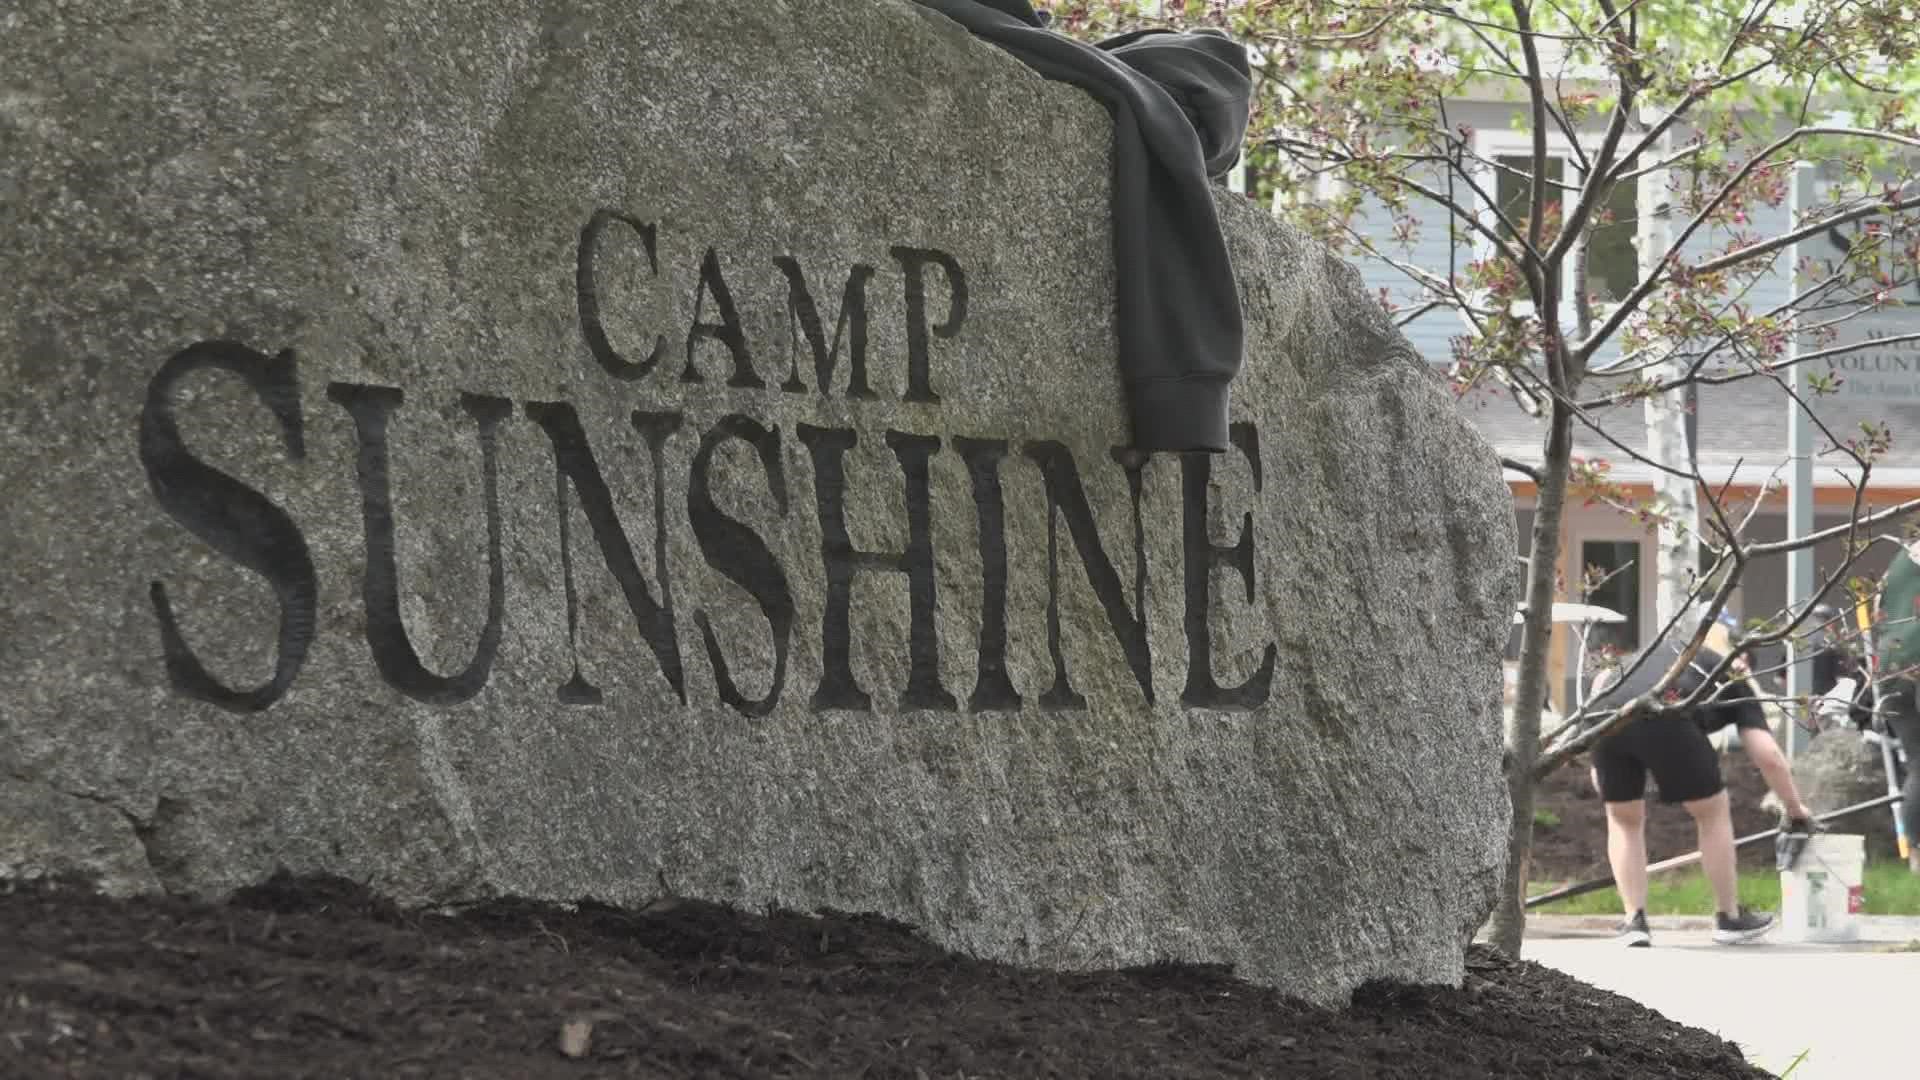 On Monday, 160 volunteers from sponsor Texas Roadhouse visited Camp Sunshine in Casco to clean up the campus and announce a special milestone.